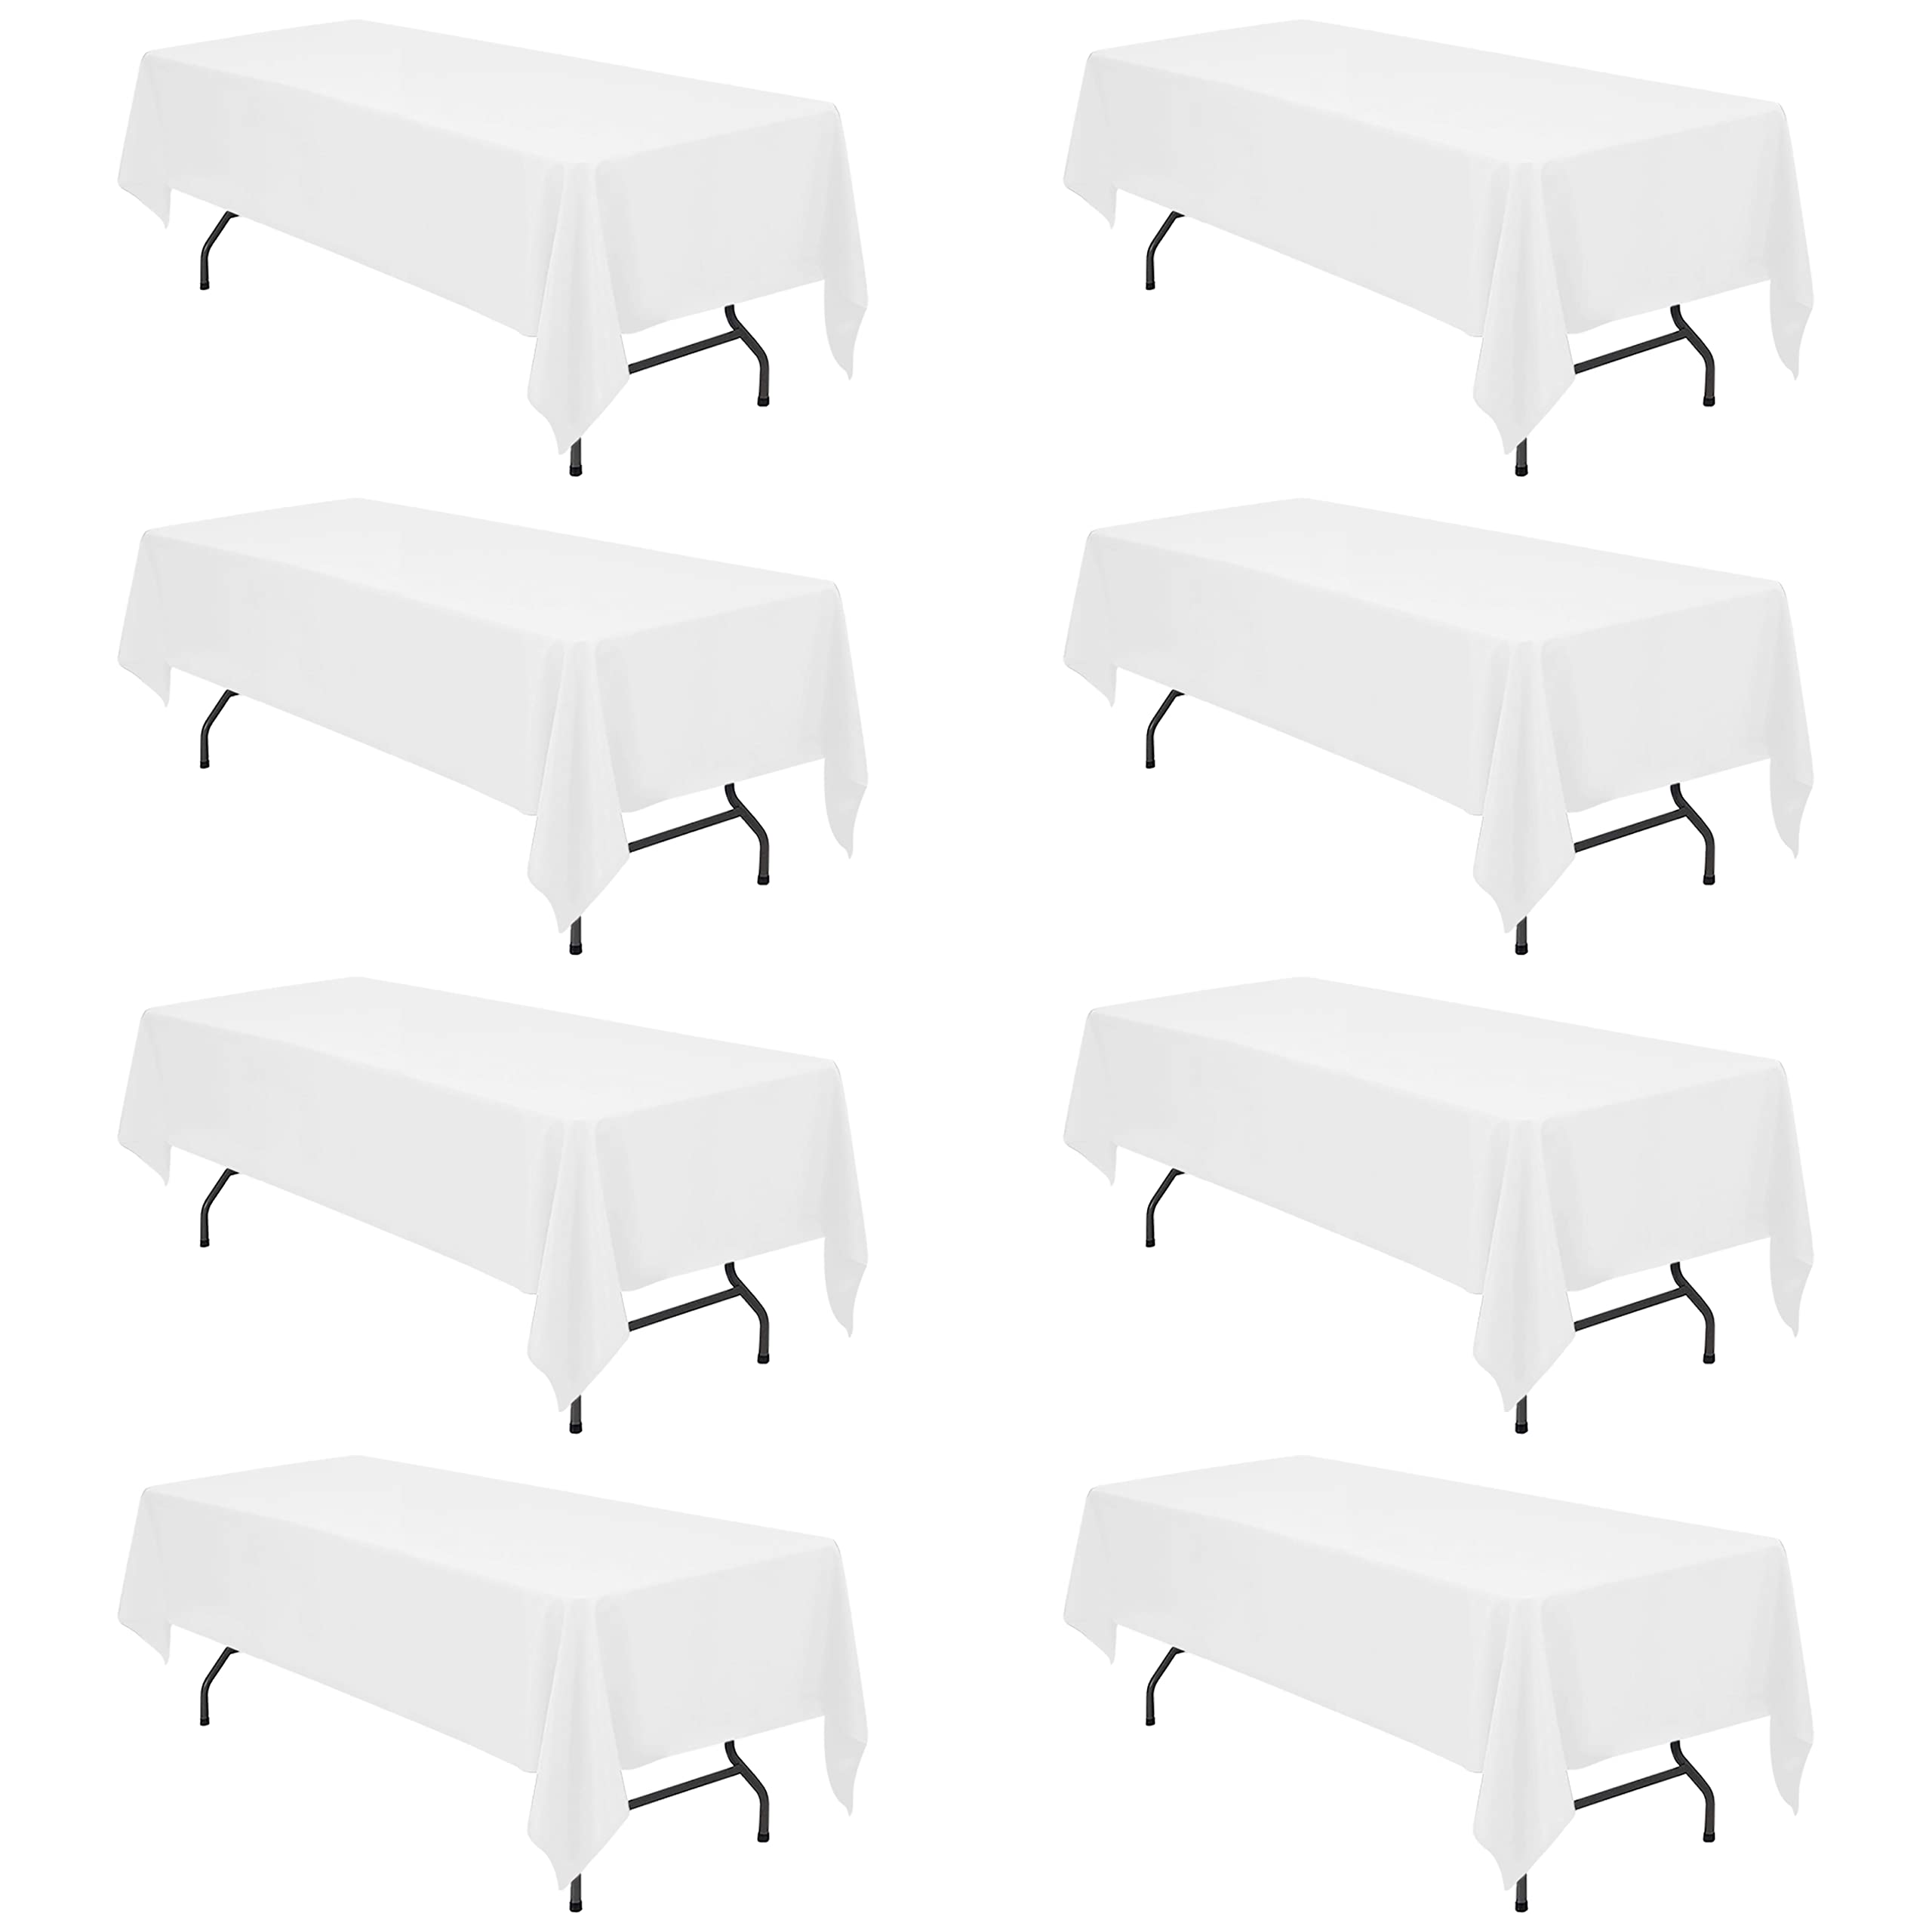 8 Pack White Tablecloths for 8 Foot Rectangle Tables 60 x 126 Inch - 8ft Rectangular Bulk Linen Polyester Fabric Washable Long Table Clothes for Wedding Reception Banquet Party Buffet Restaurant